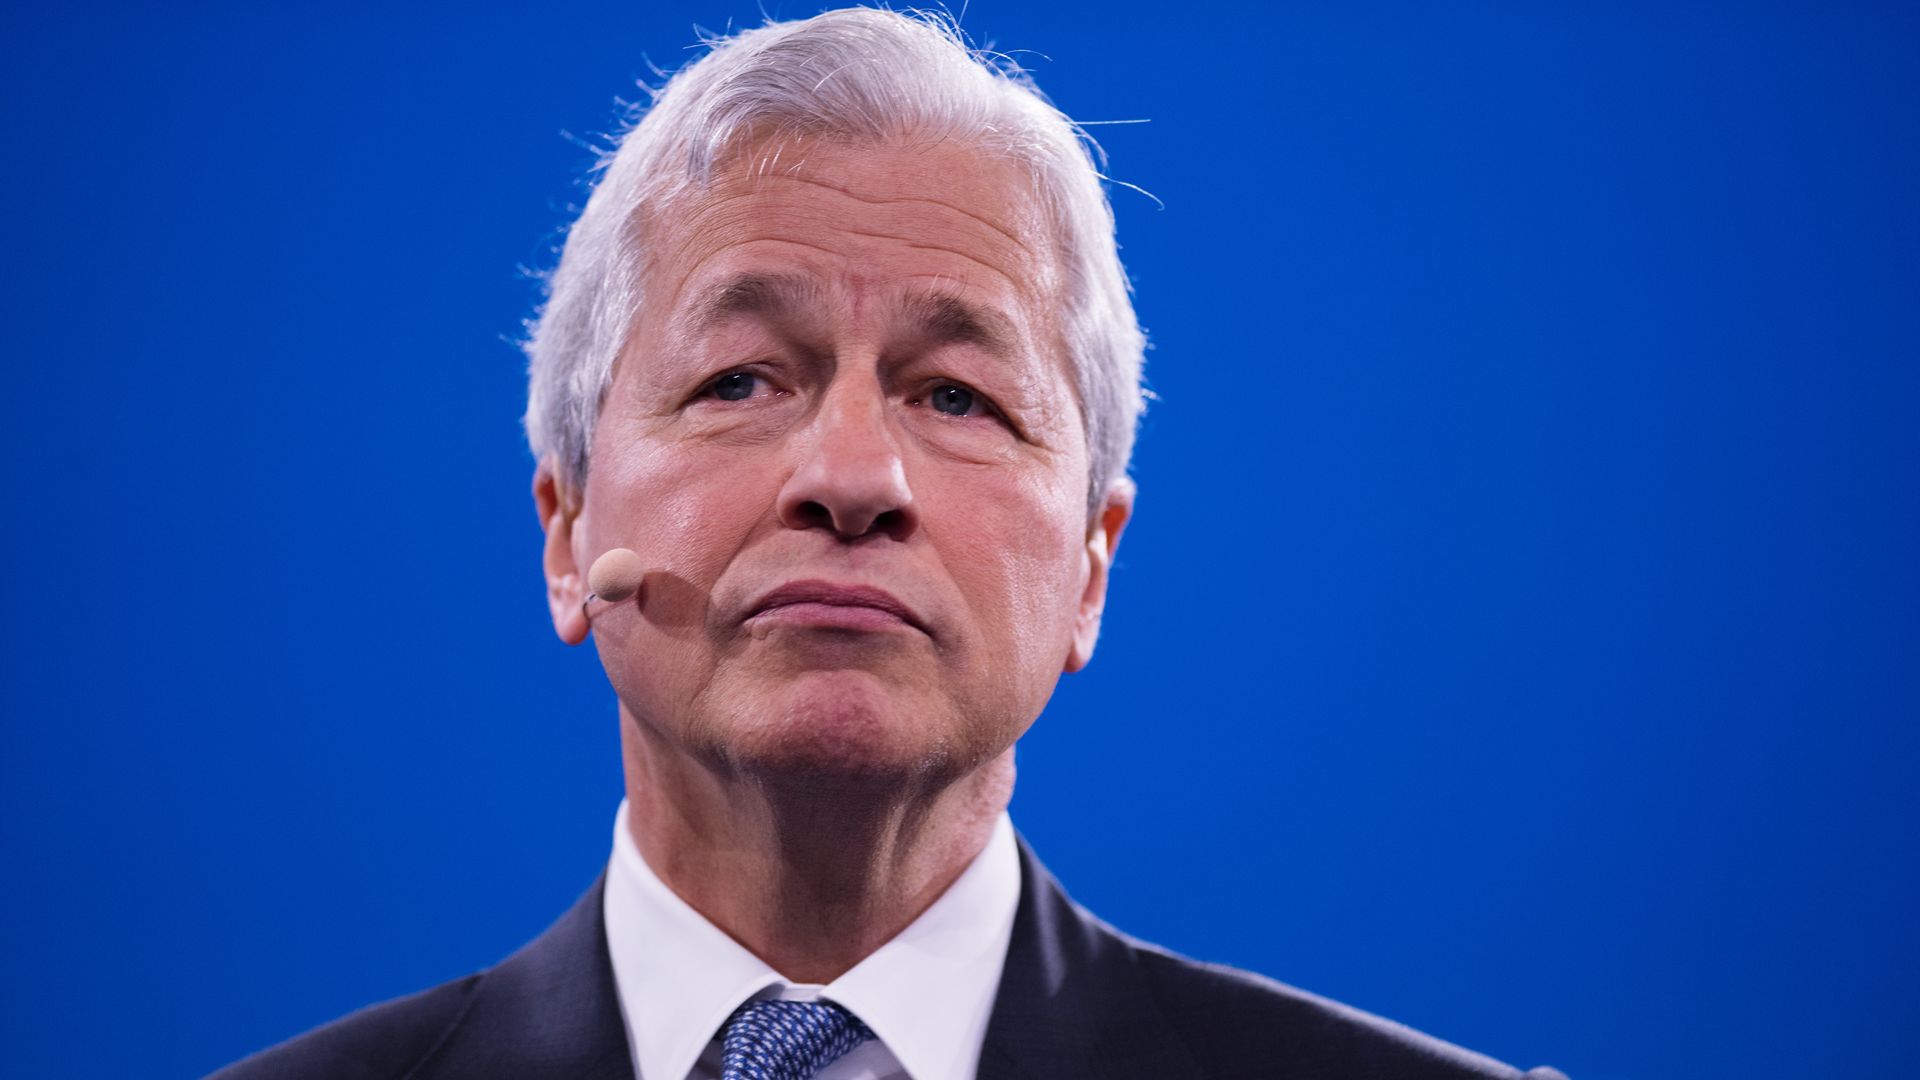 CEO of JPMorgan Chase Jamie Dimon speaking at a forum in New York in September 2019.